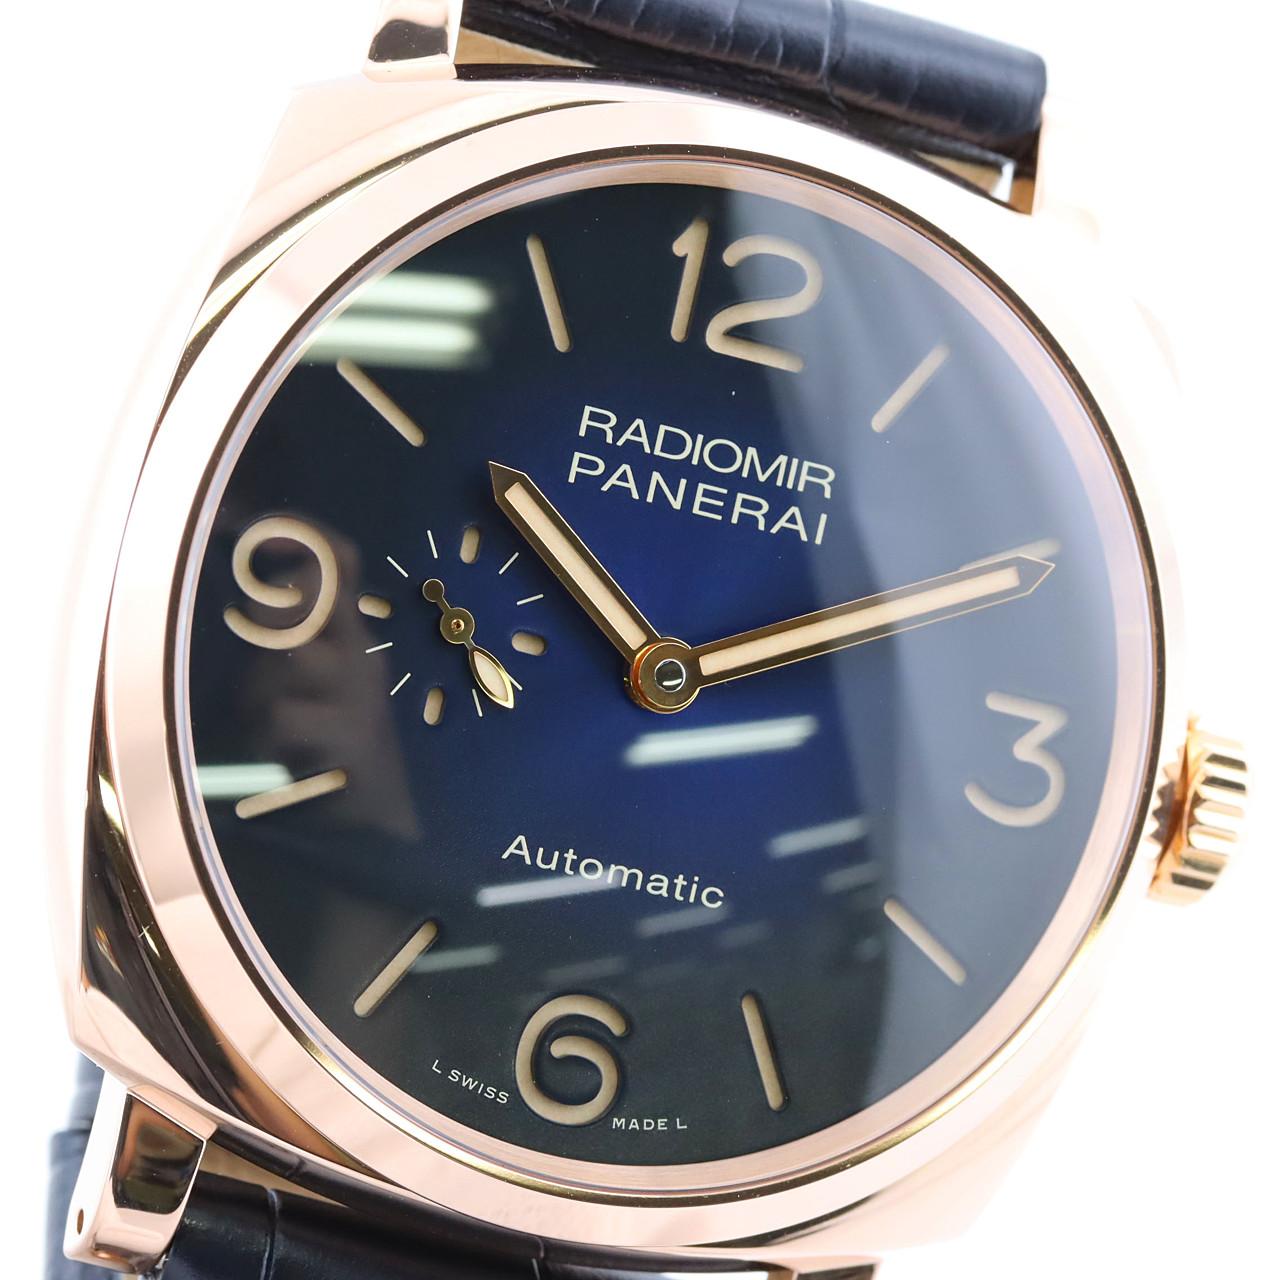 PANERAI Radiomir 1940 3DAYS Oro Rosso LIMITED PAM00934 PG/RG Automatic